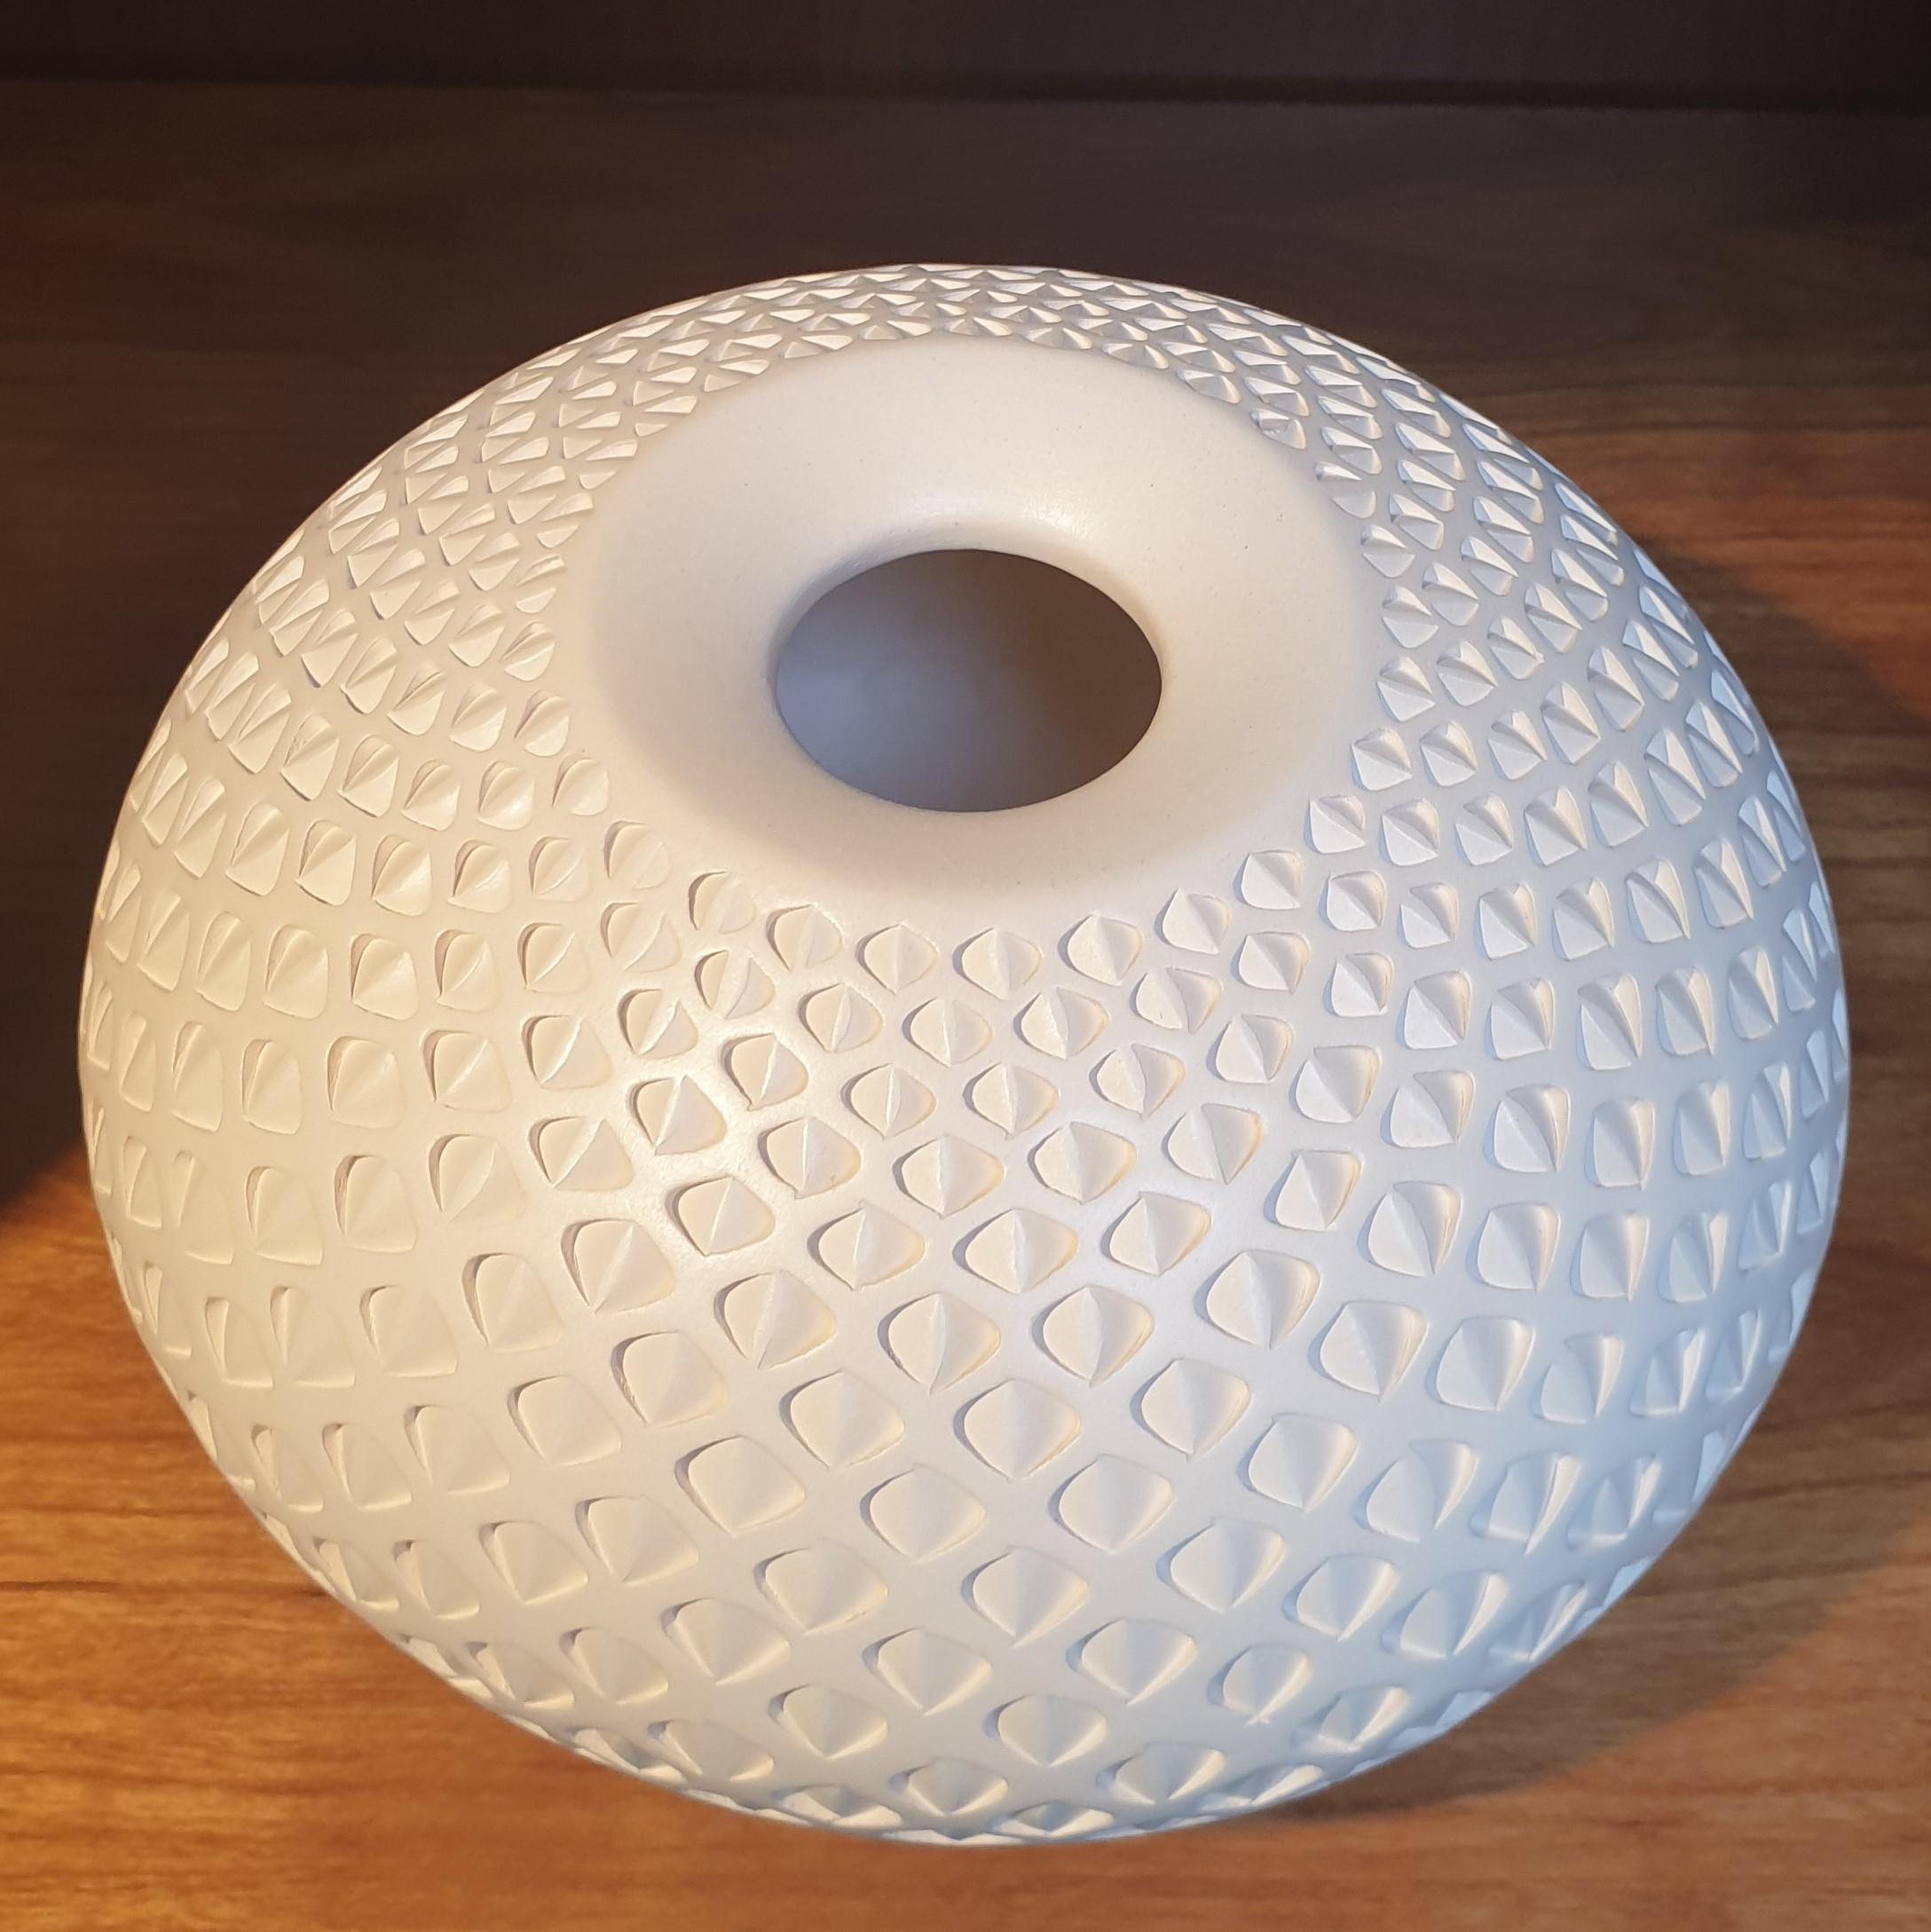 This off-white Oval Eye Vessel is a unique small size contemporary modern ceramic vase shaped vessel by US-artist Michael Wisner. The hand-coiled shape of this object is simple but very elegant, complementing the intense patterning made through a